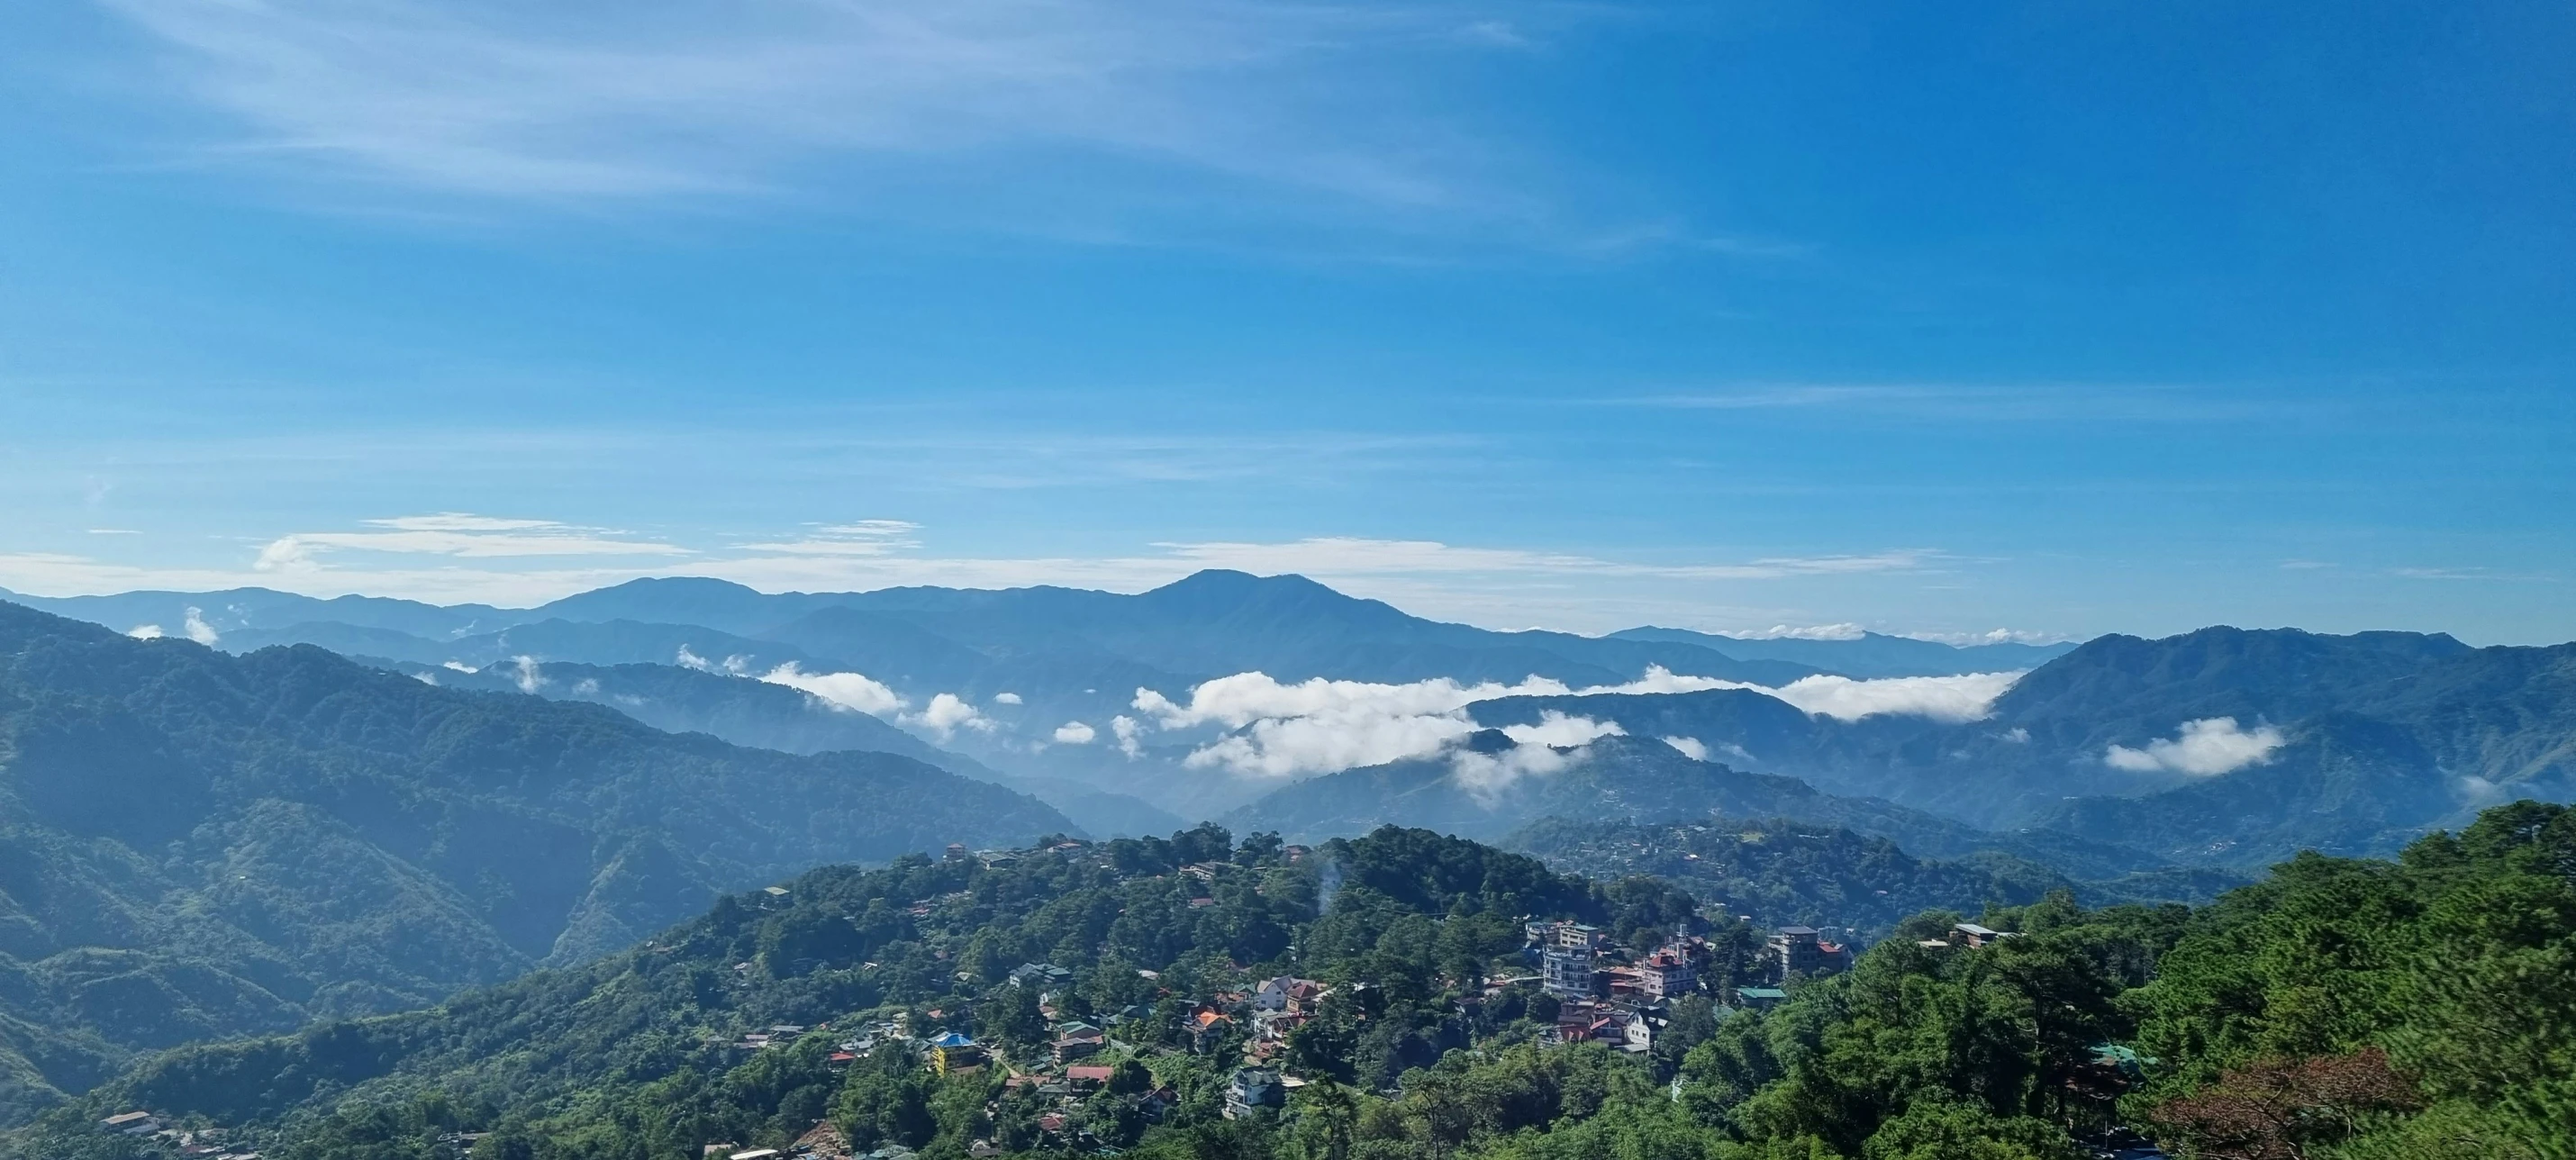 a scenic view over the valley and mountains with mist in the air